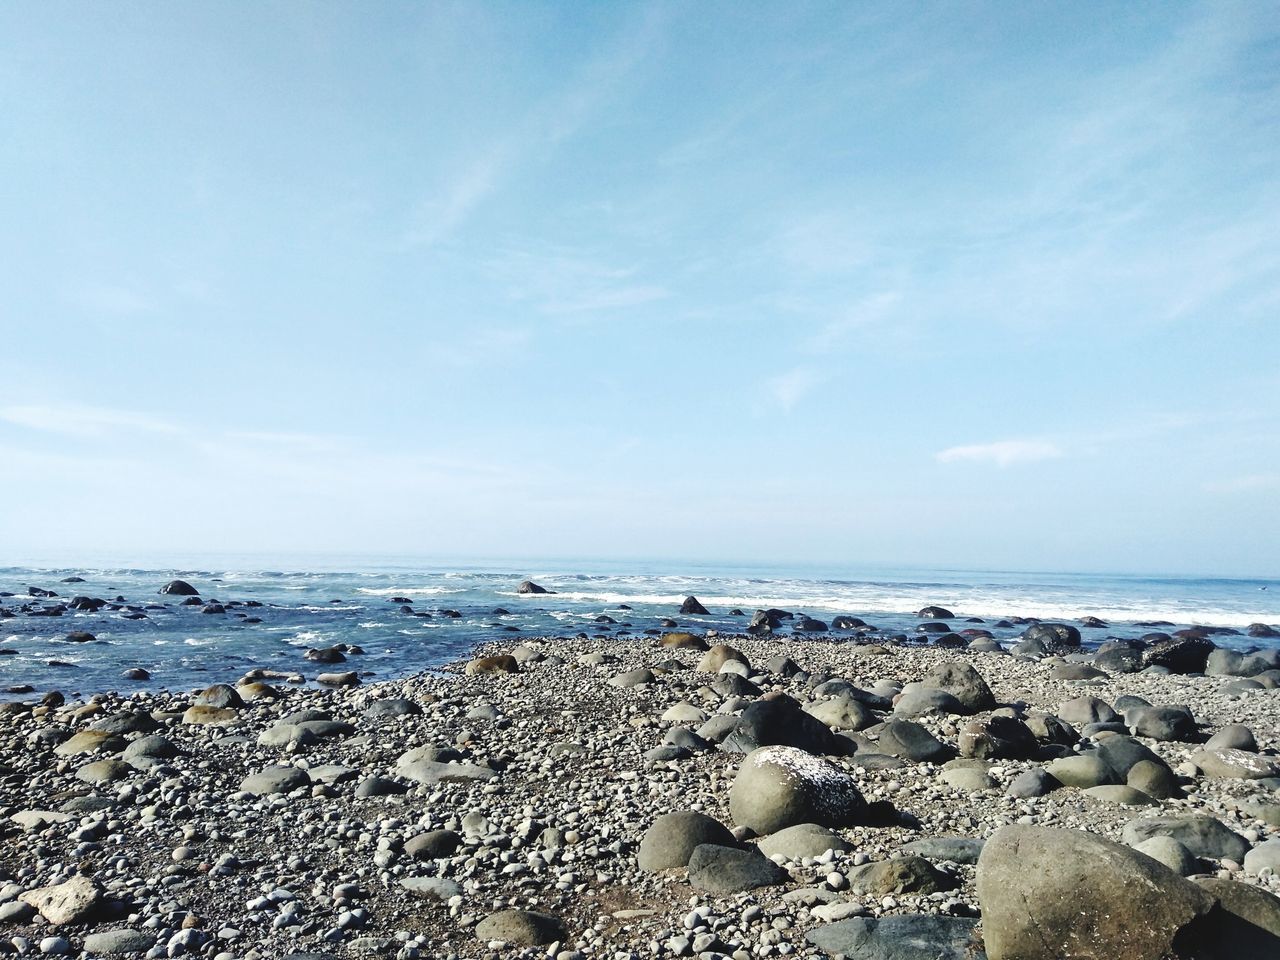 sea, water, sky, beach, scenics - nature, land, beauty in nature, horizon over water, solid, horizon, rock, tranquil scene, nature, tranquility, no people, rock - object, day, cloud - sky, outdoors, rocky coastline